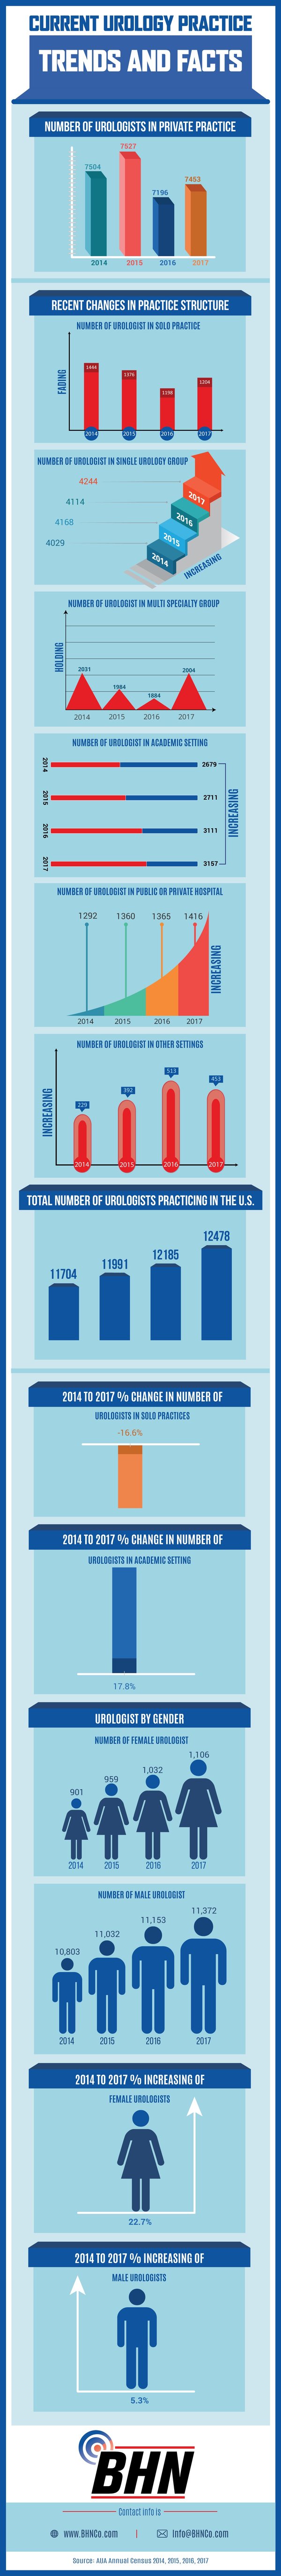 BHN Urology Practice Trends and Facts Infographic 2018 Part2